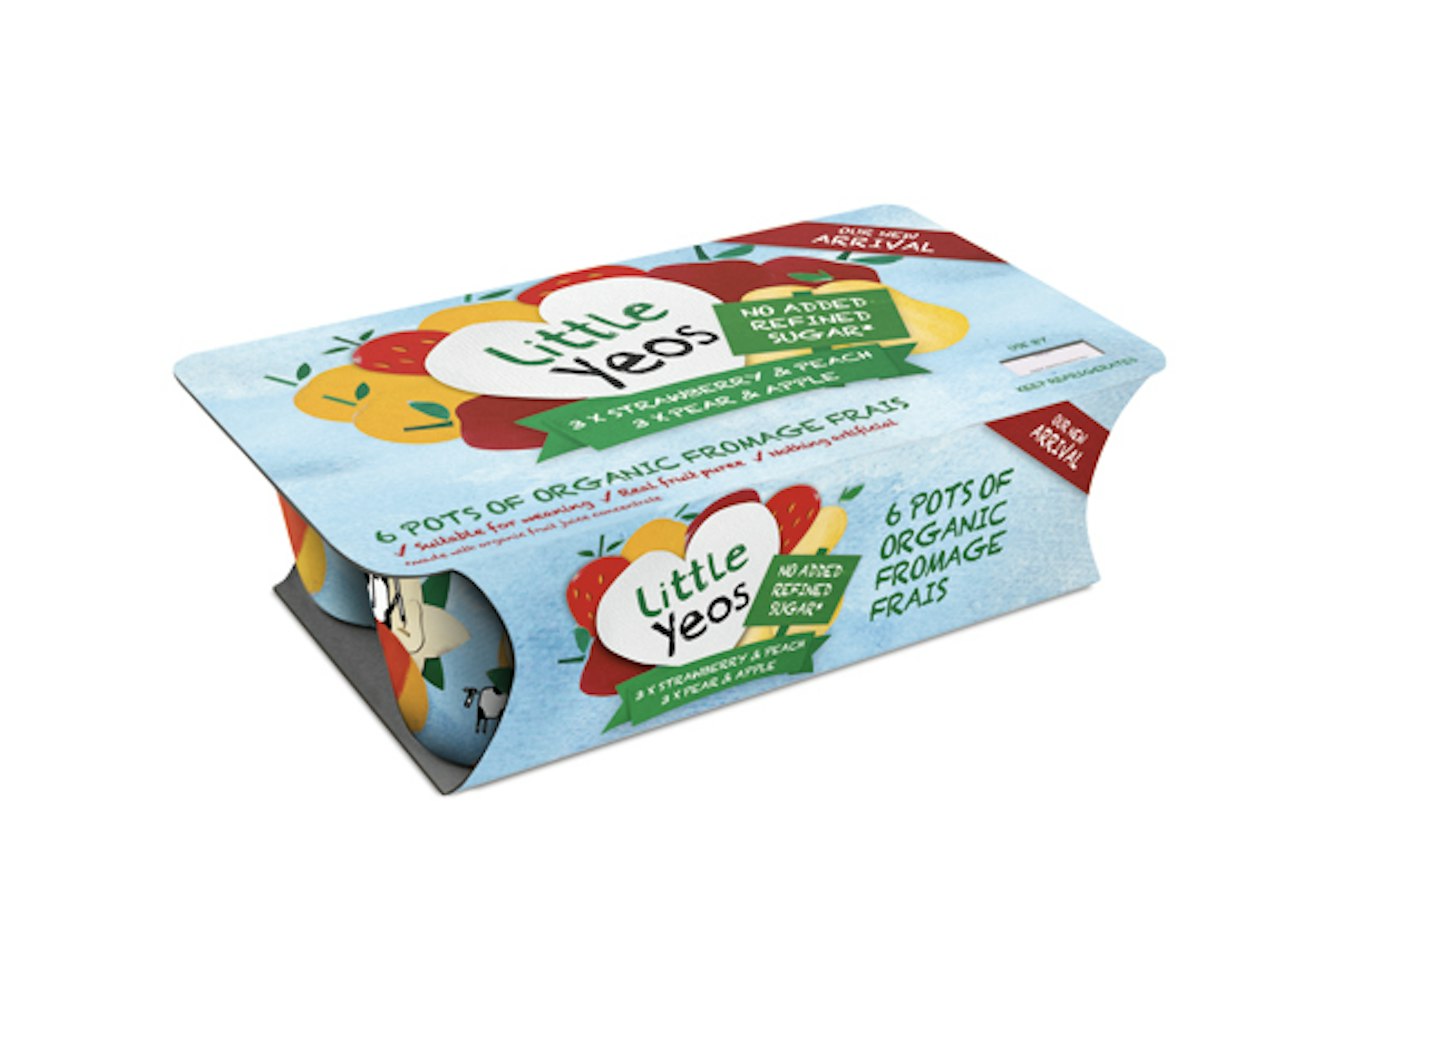 Yeo Valley Little Yeos Organic Fromage Frais, £1.79 for six